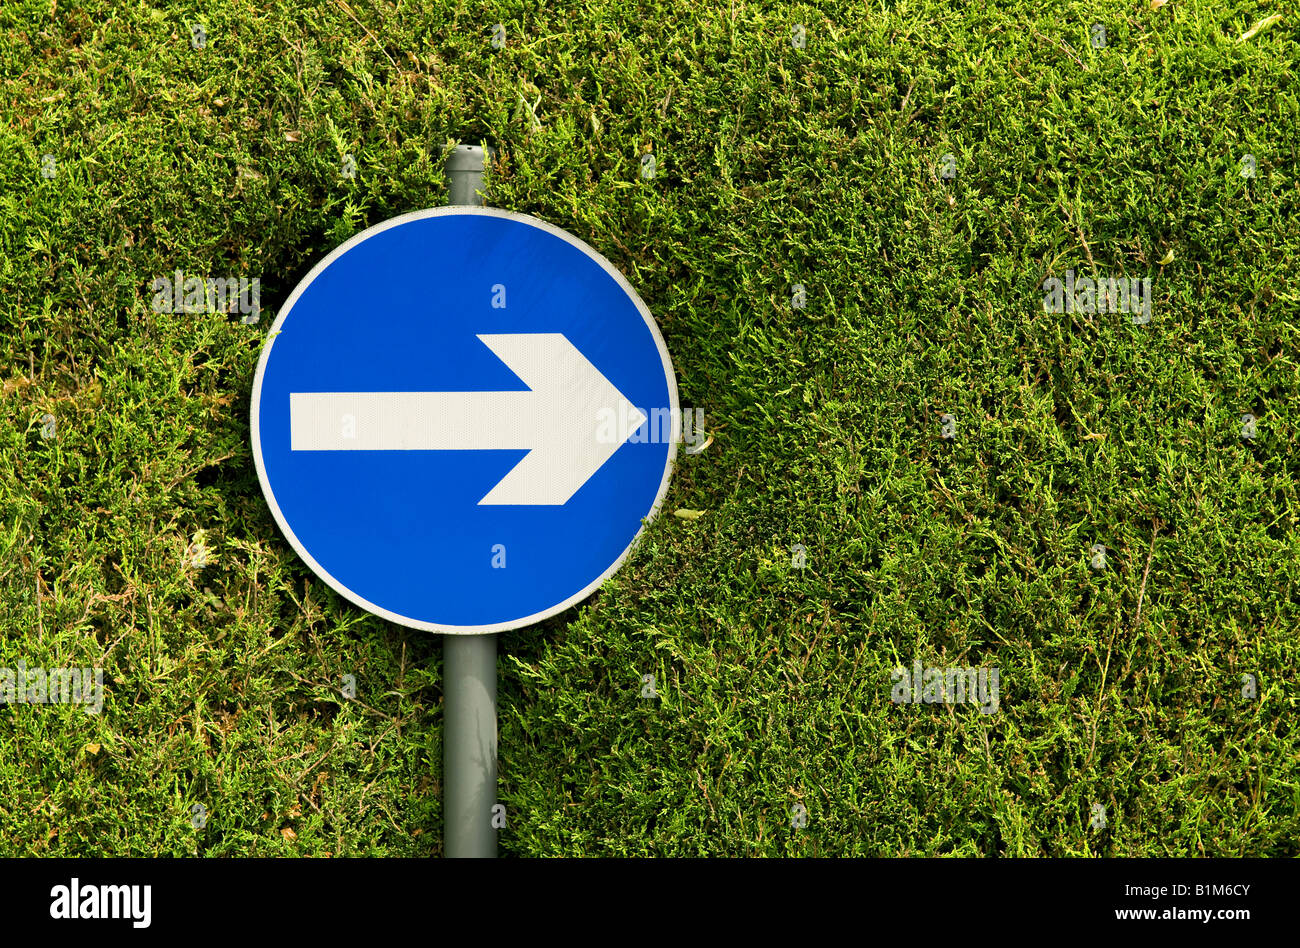 one way direction sign in clipped hedge Stock Photo